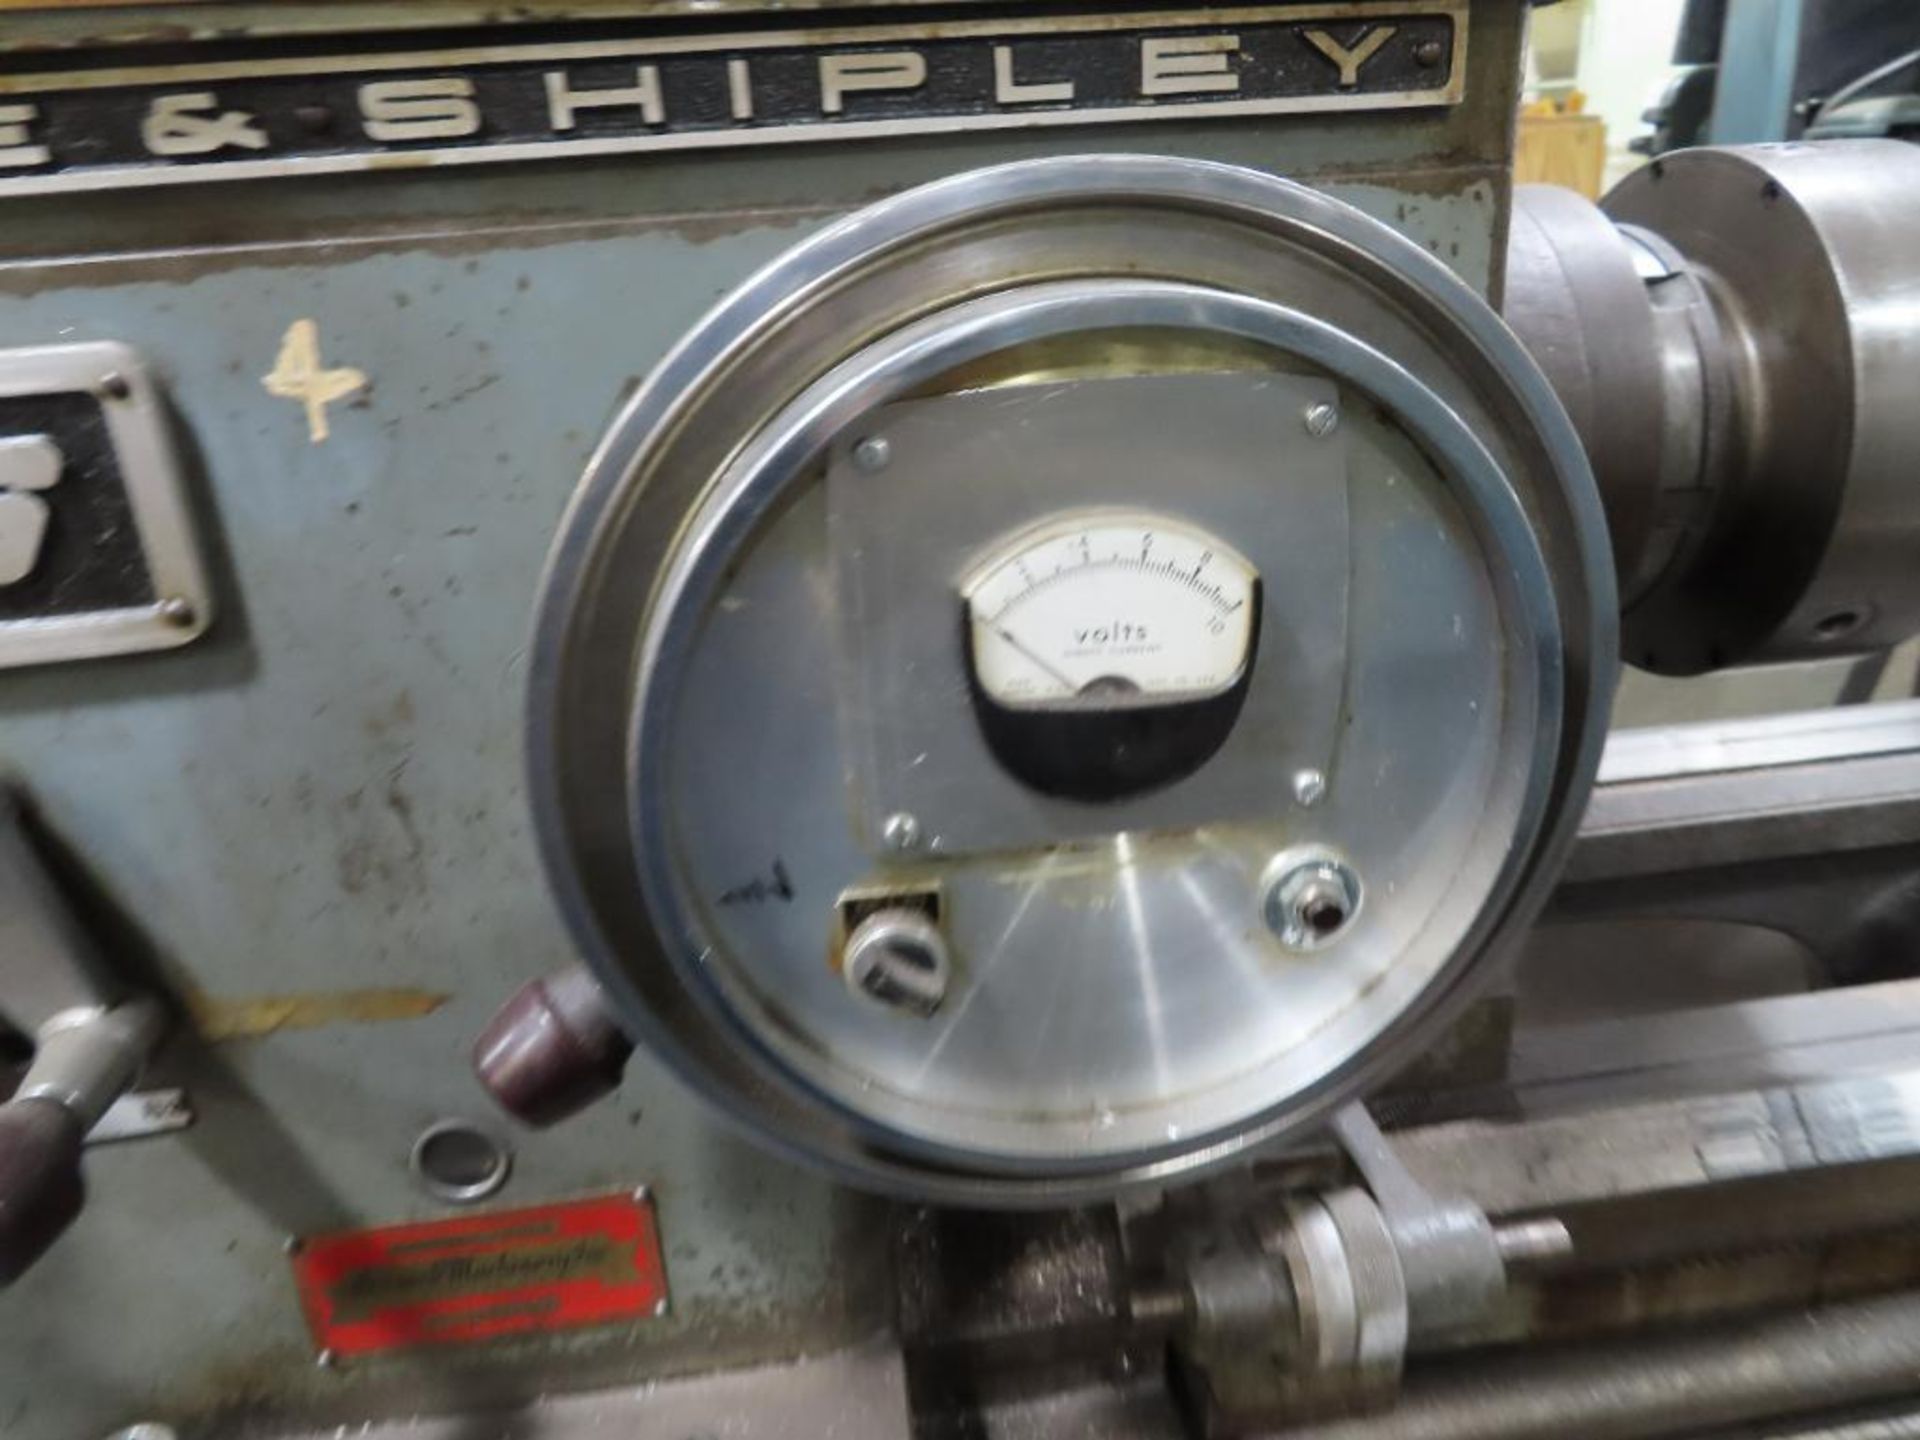 Lodge & Shipley AVS Geared Head Engine Lathe, 20" X 60", 10" 3-Jaw Chuck, Threading Dial, Tailstock - Image 2 of 5